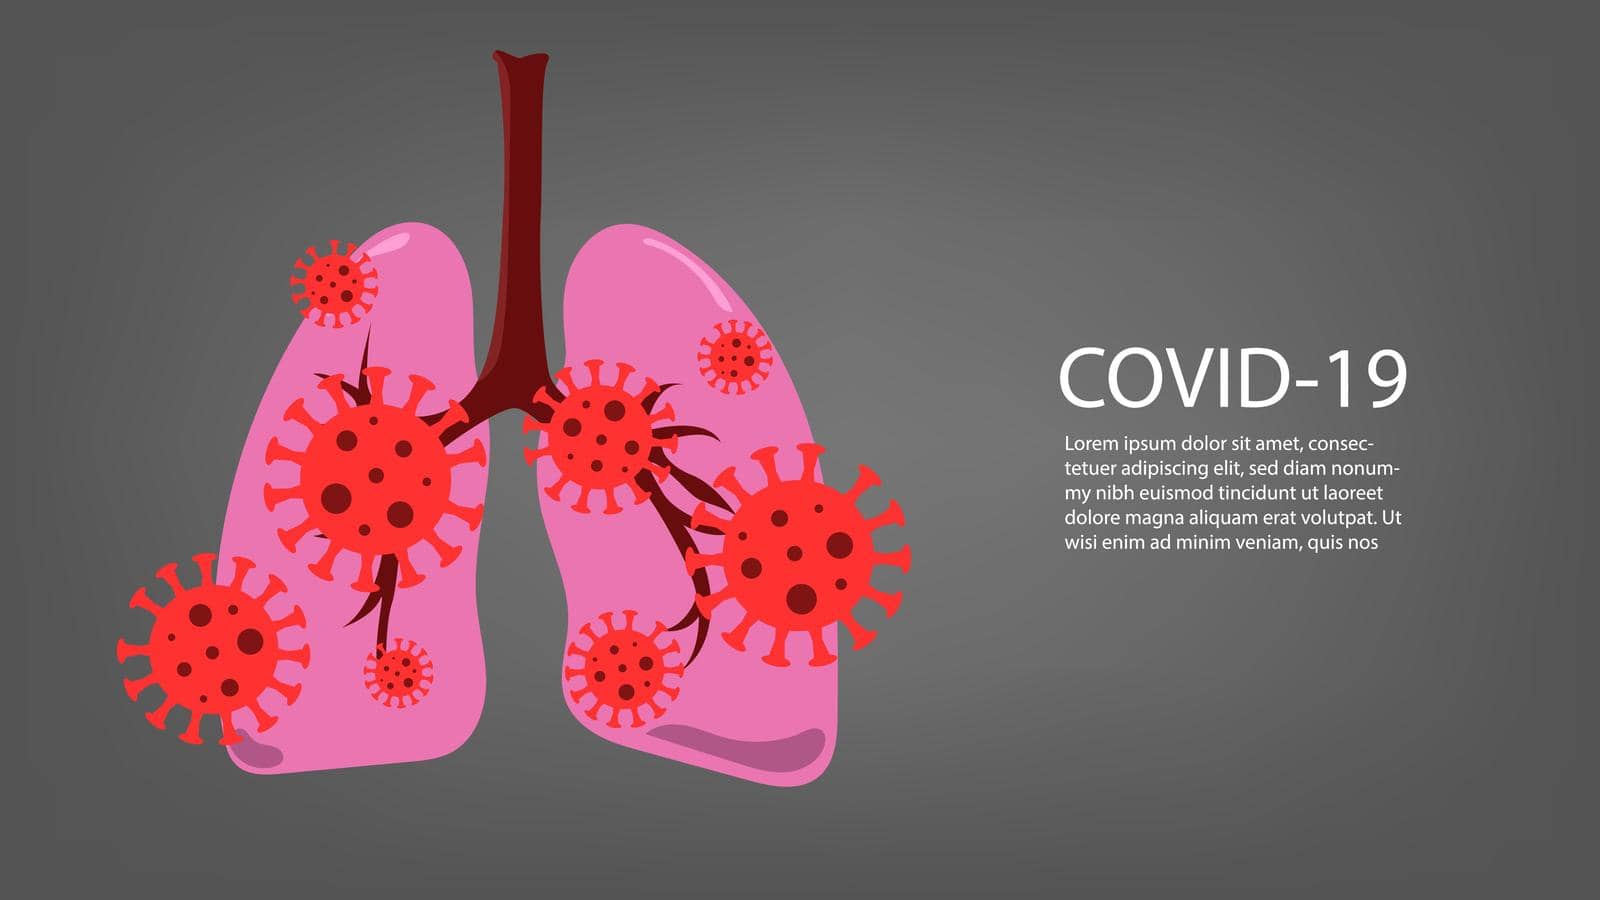 Virus cells in lung. Infected lungs. Coronavirus, COVID-19. 2019-nCoV. lung disease, pneumonia, asthma, cancer, tuberculosis.